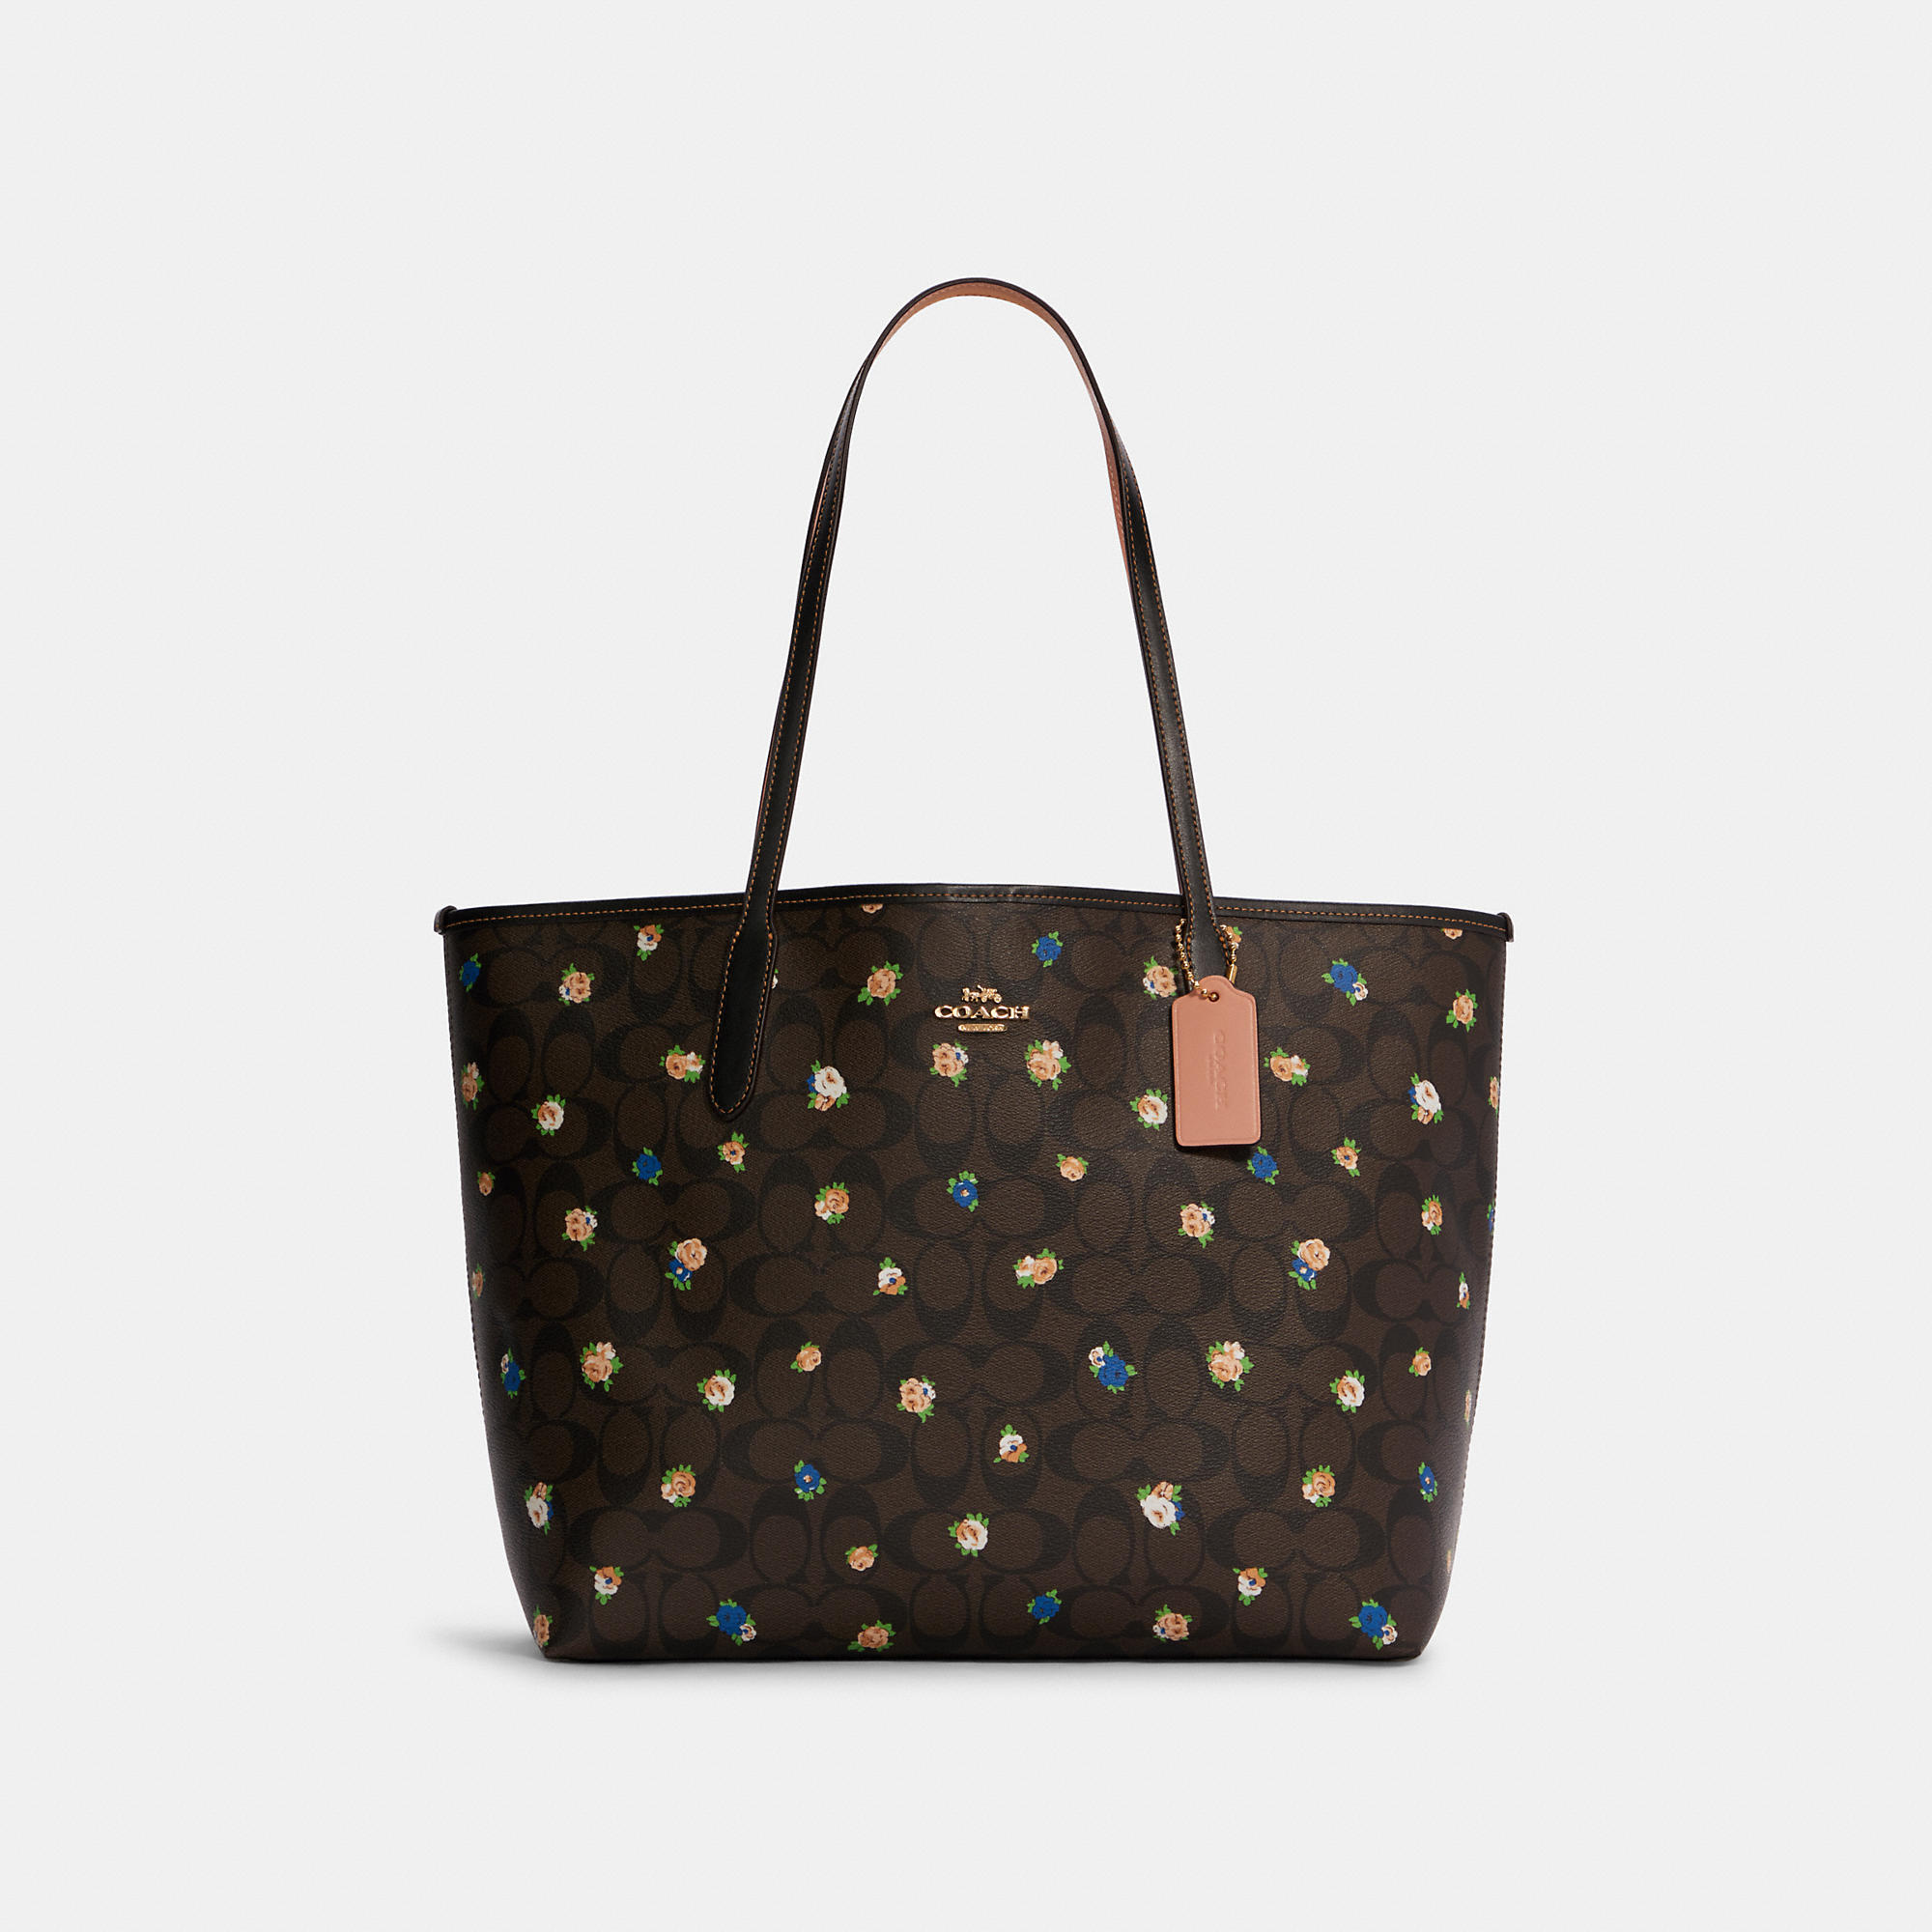 COACH Women's City Tote In Signature Canvas With Vintage Mini Rose Print - Gold/brown Black Multi